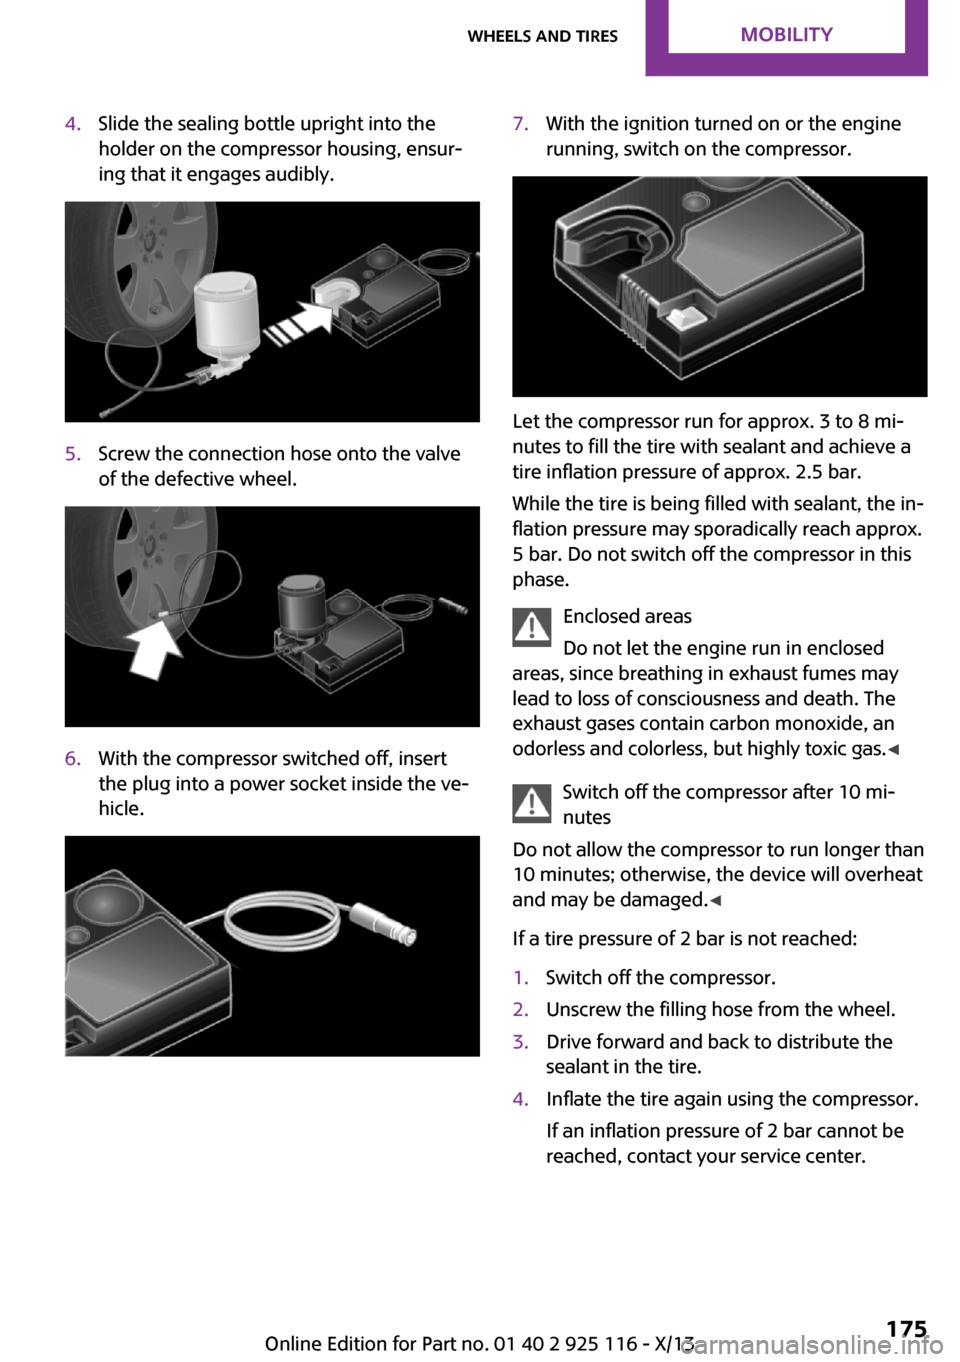 MINI 3 door 2013 User Guide 4.Slide the sealing bottle upright into the
holder on the compressor housing, ensur‐
ing that it engages audibly.5.Screw the connection hose onto the valve
of the defective wheel.6.With the compress